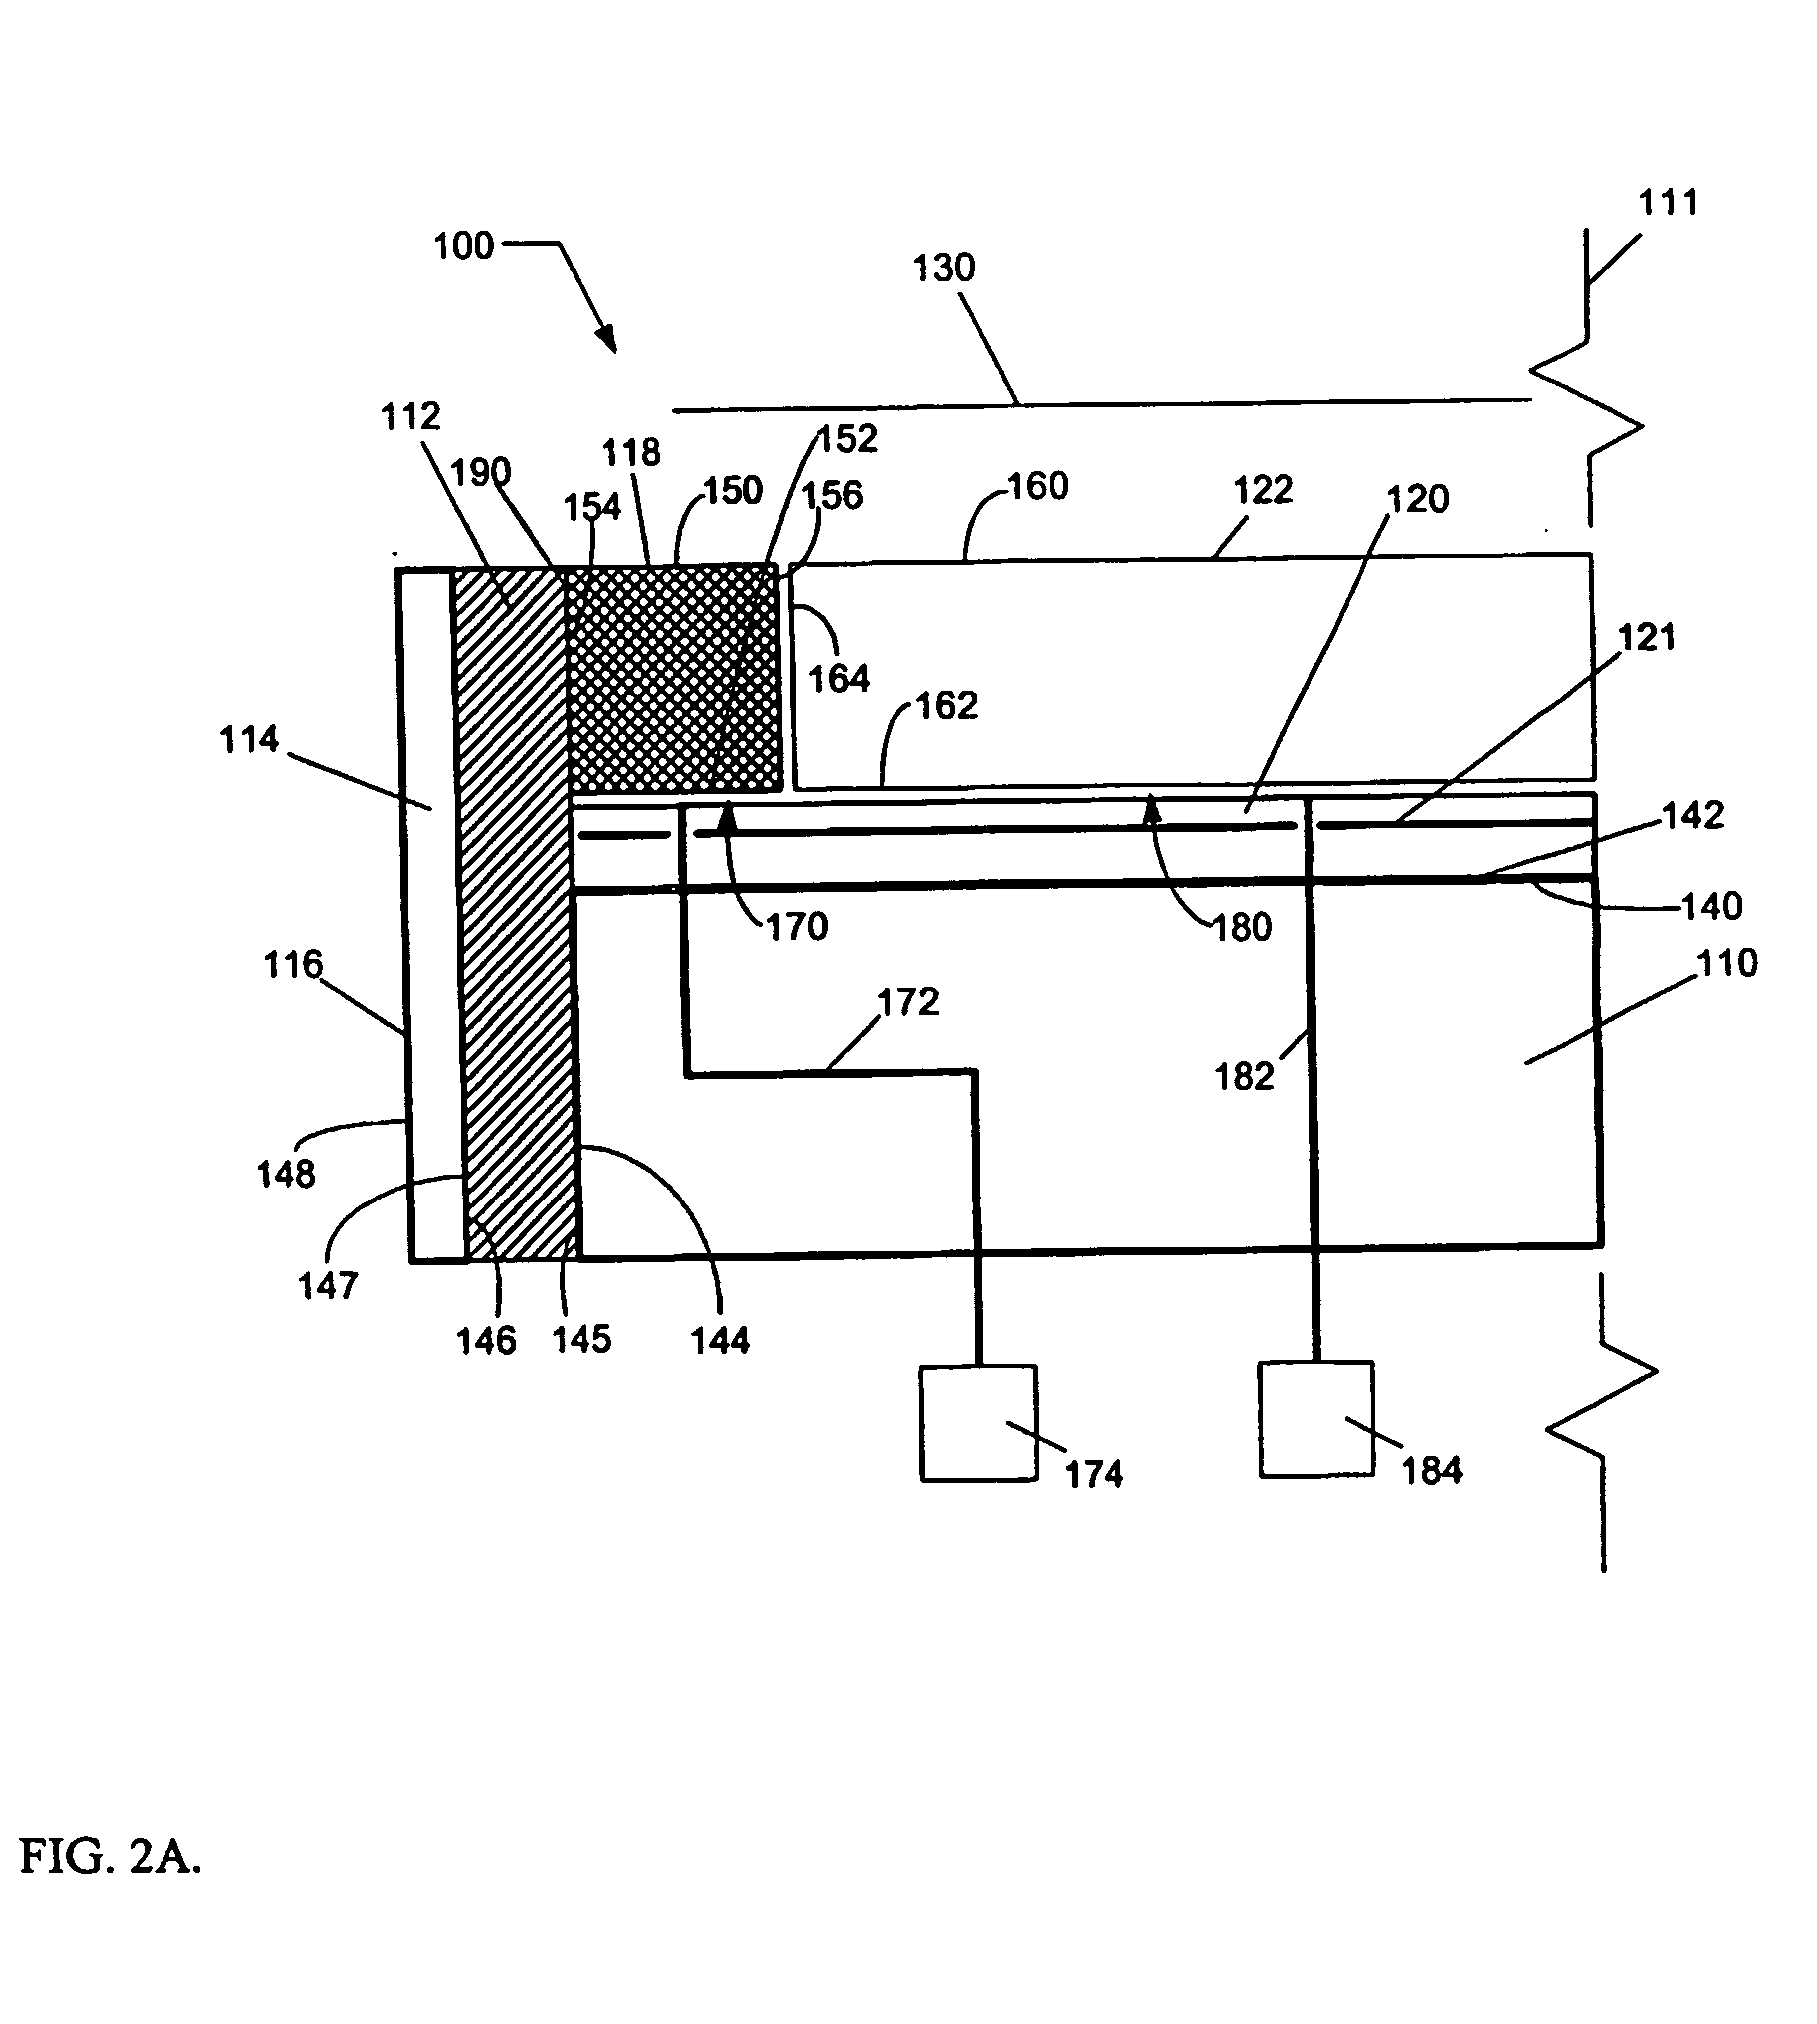 Substrate holder for plasma processing